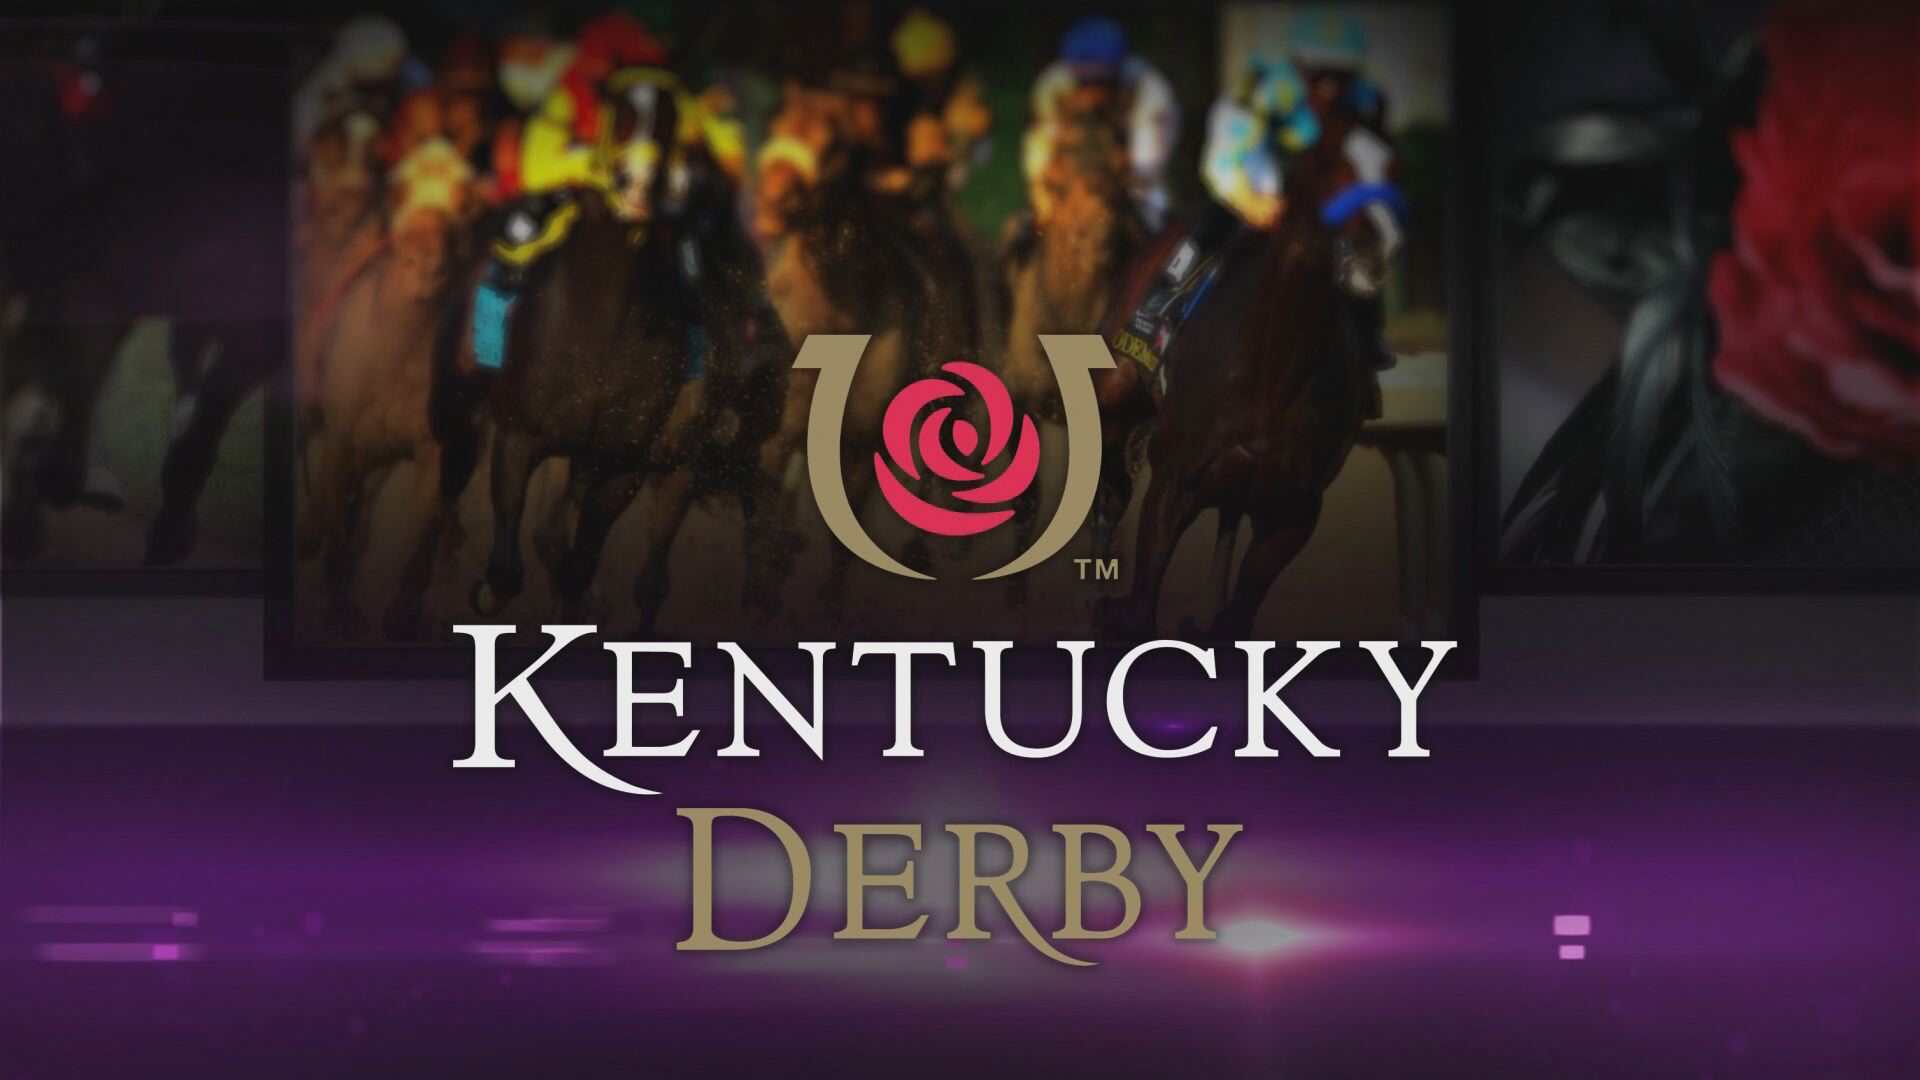 Get your Kentucky Derby horse name 9NEWS at 4 pm 42914 1920x1080